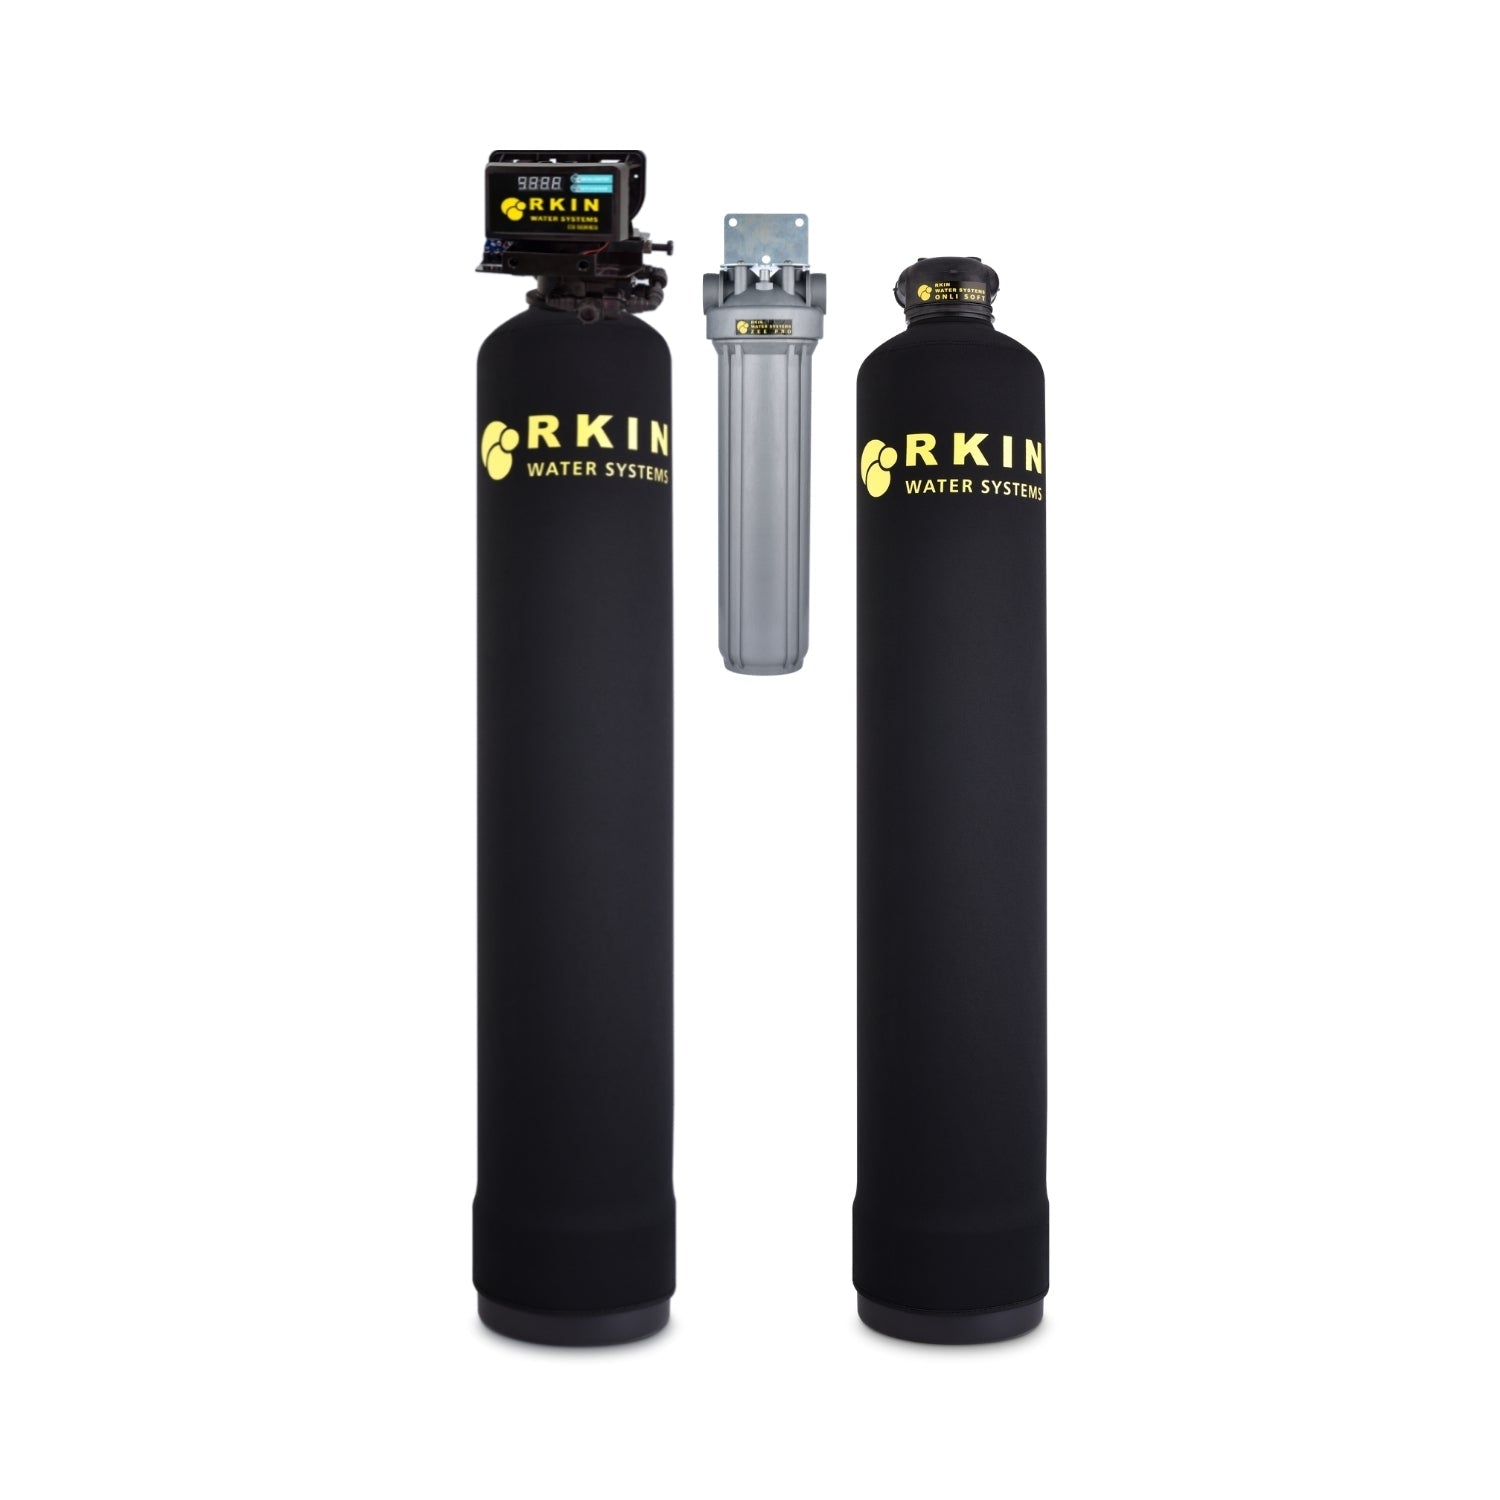 Salt-Free Water Softener and Well Water Filter Combo from RKIN